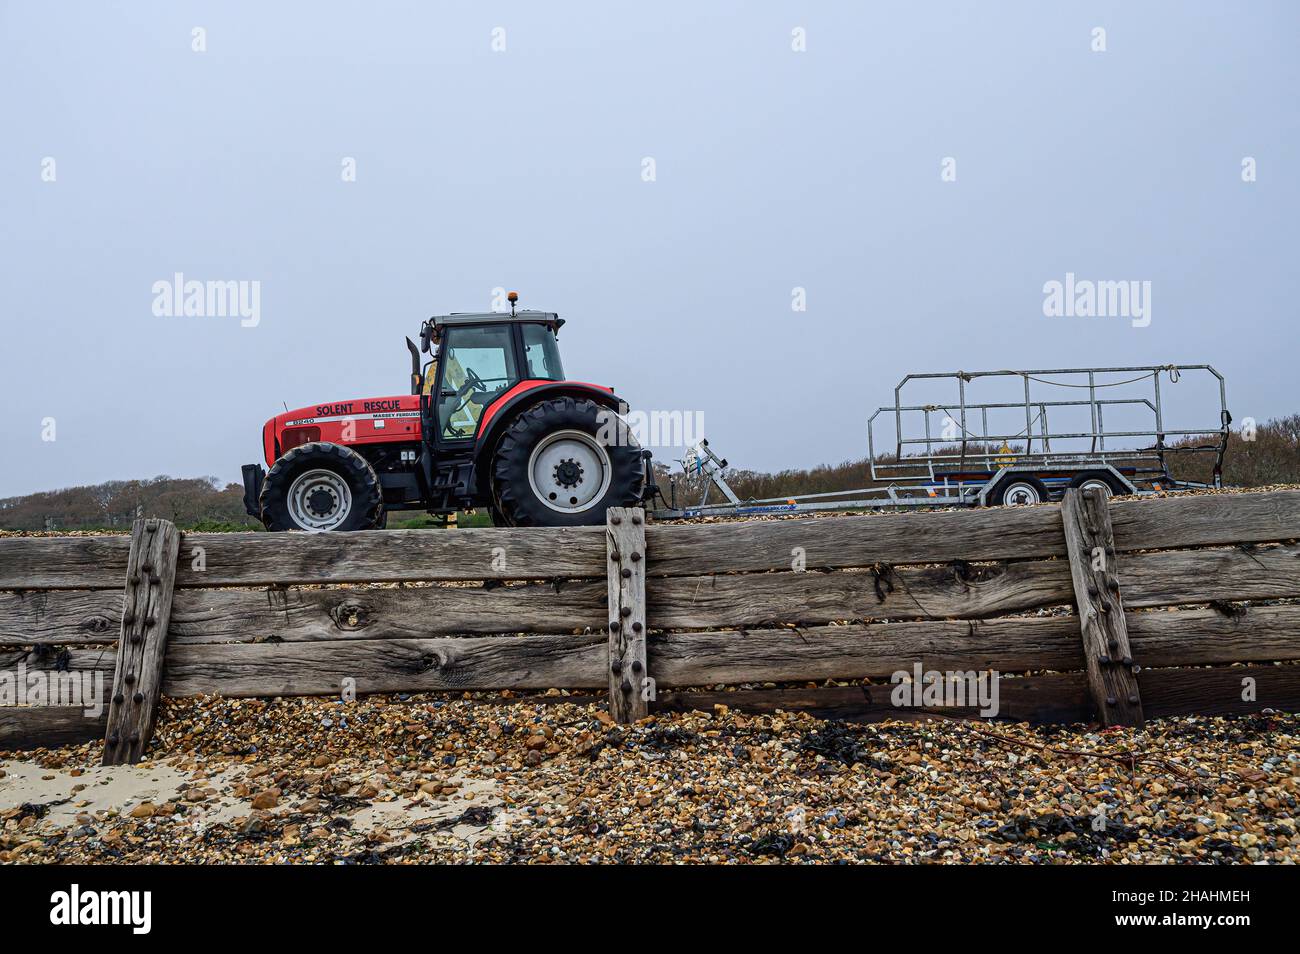 Solent rescue red massey ferguson tractor and rescue boat trailer parked on pebble bank at Lepe beach, weathered wooden storm fence. Lepe Country Park Stock Photo